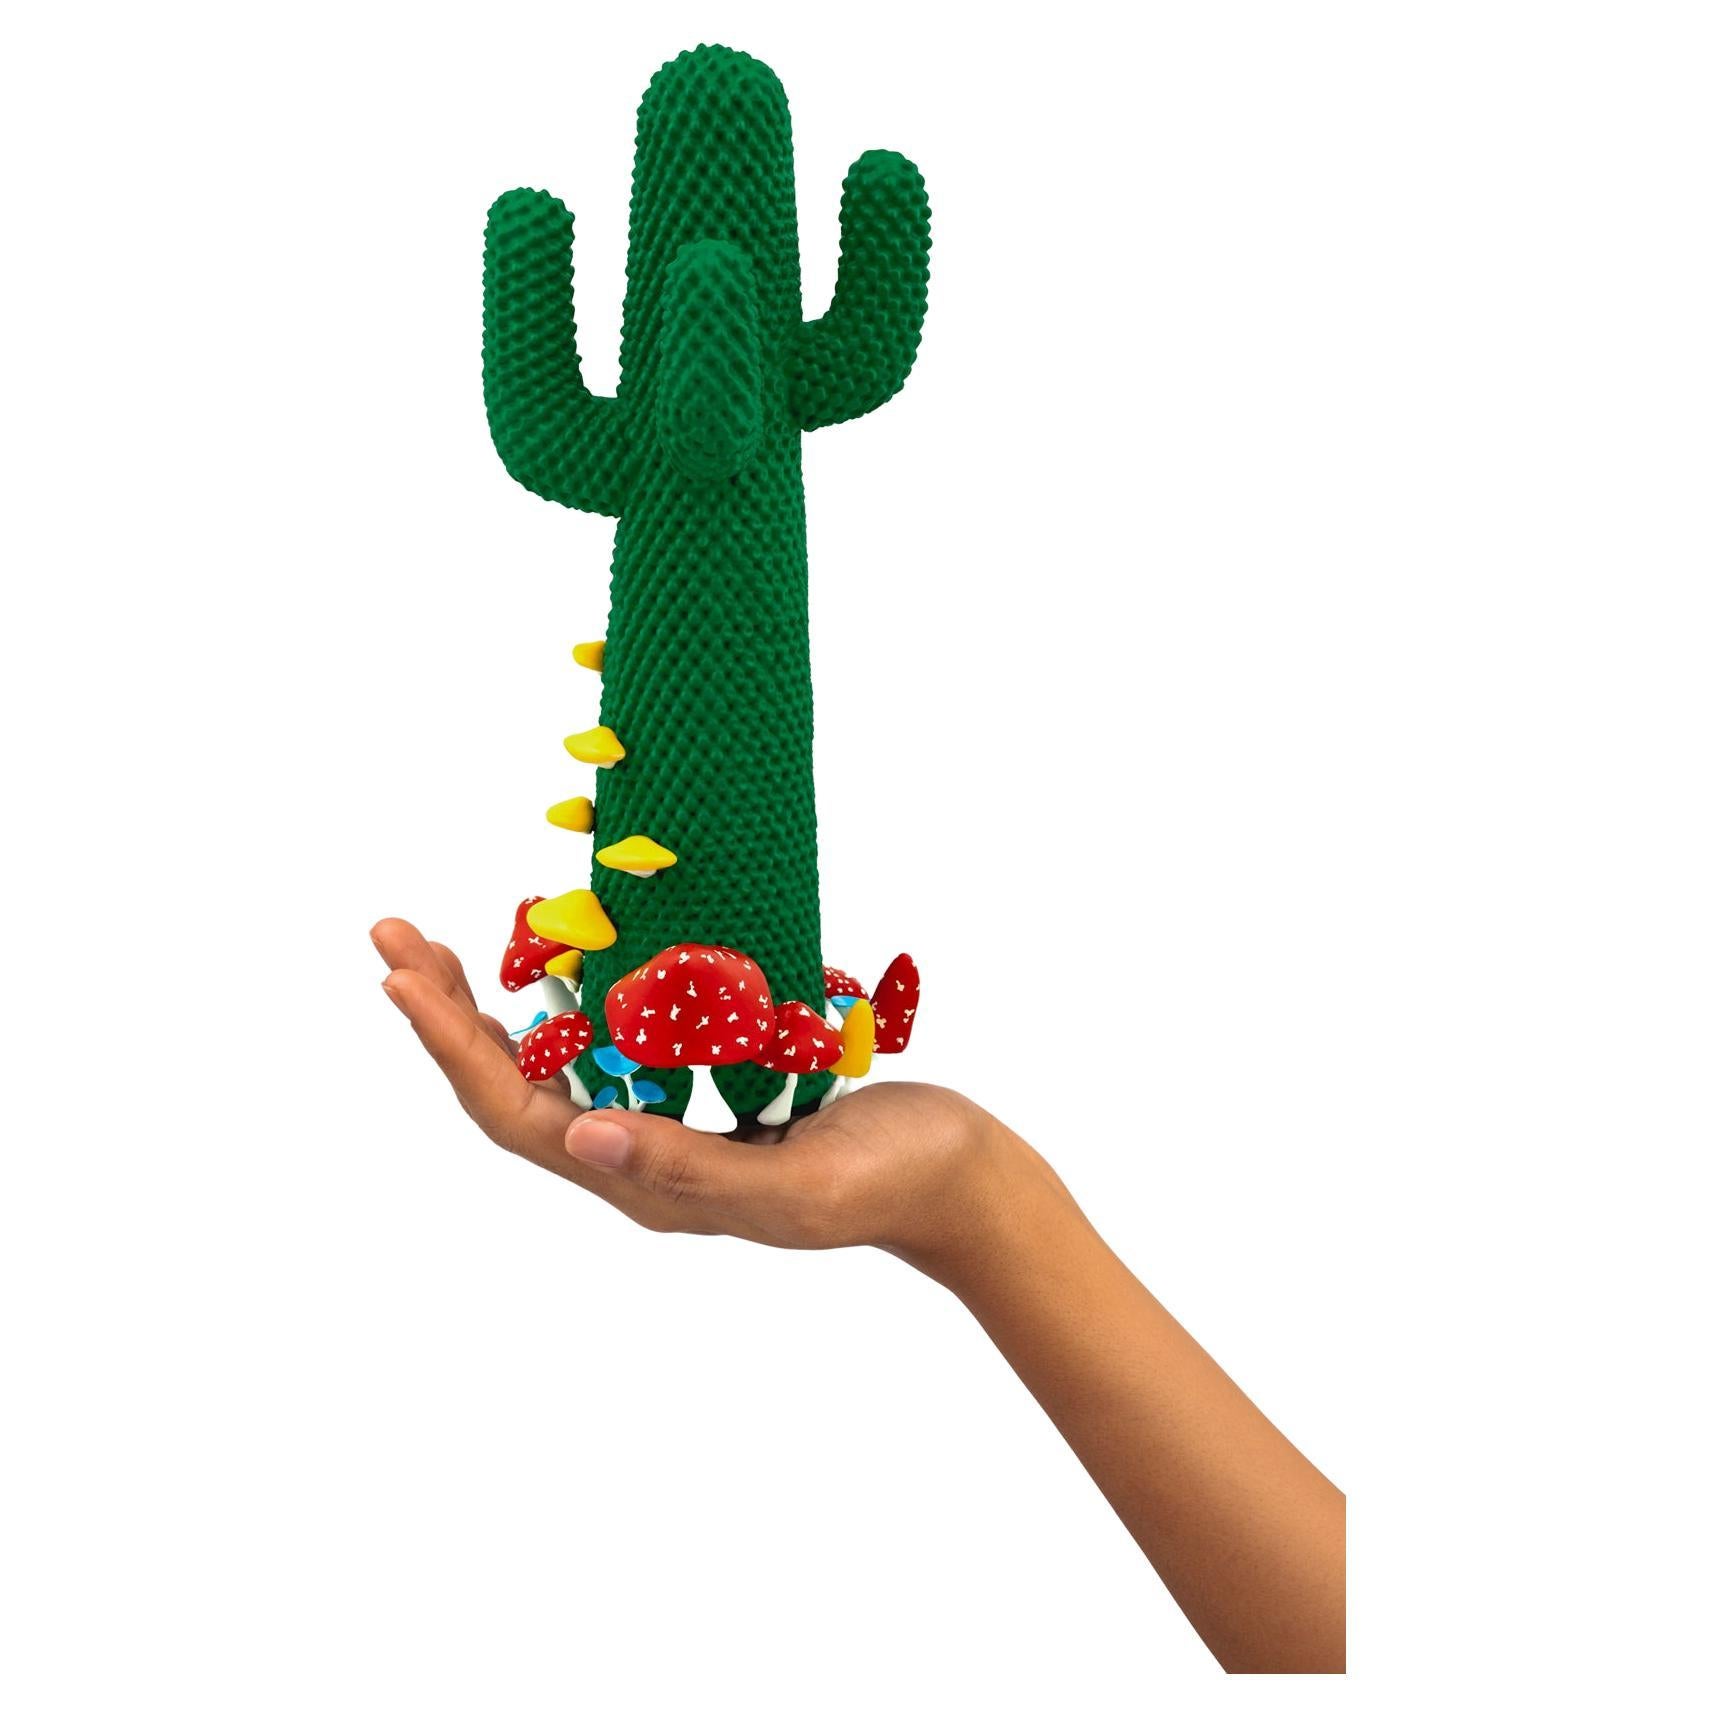 Limited Edition #37/99

Gufram presents the miniaturised version of the Shroom CACTUS® created in collaboration with A$AP Rocky and the artist’s new design studio HOMMEMADE Exactly as the real-size Shroom CACTUS®, the new Guframini piece features